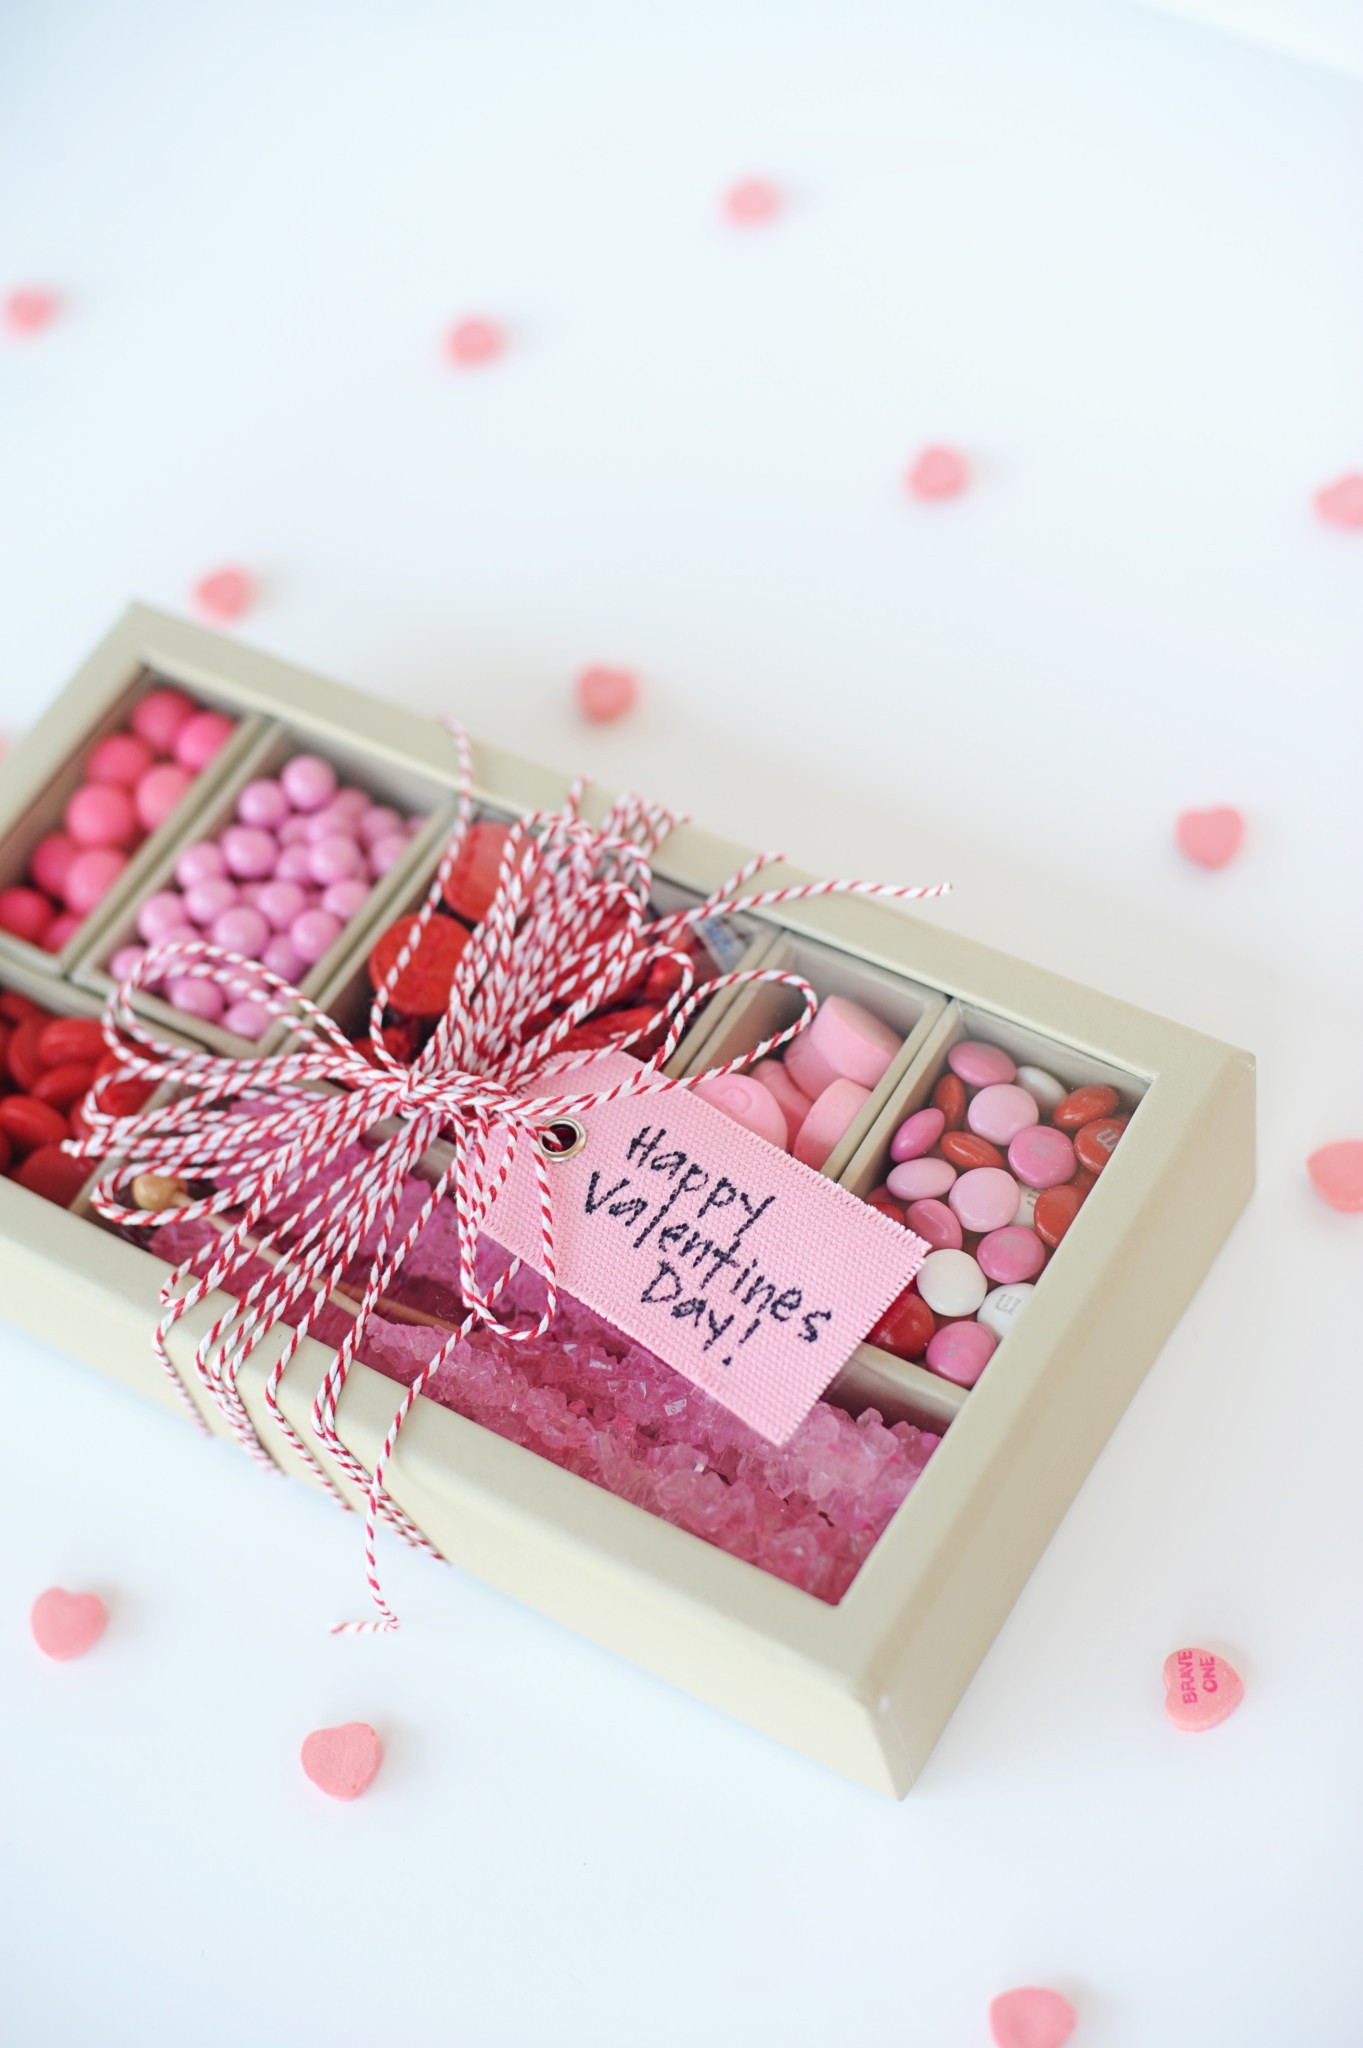 Valentines Candy Gift Ideas
 Super Cute DIY Valentines Candy Gift Box Craft Red & Pink